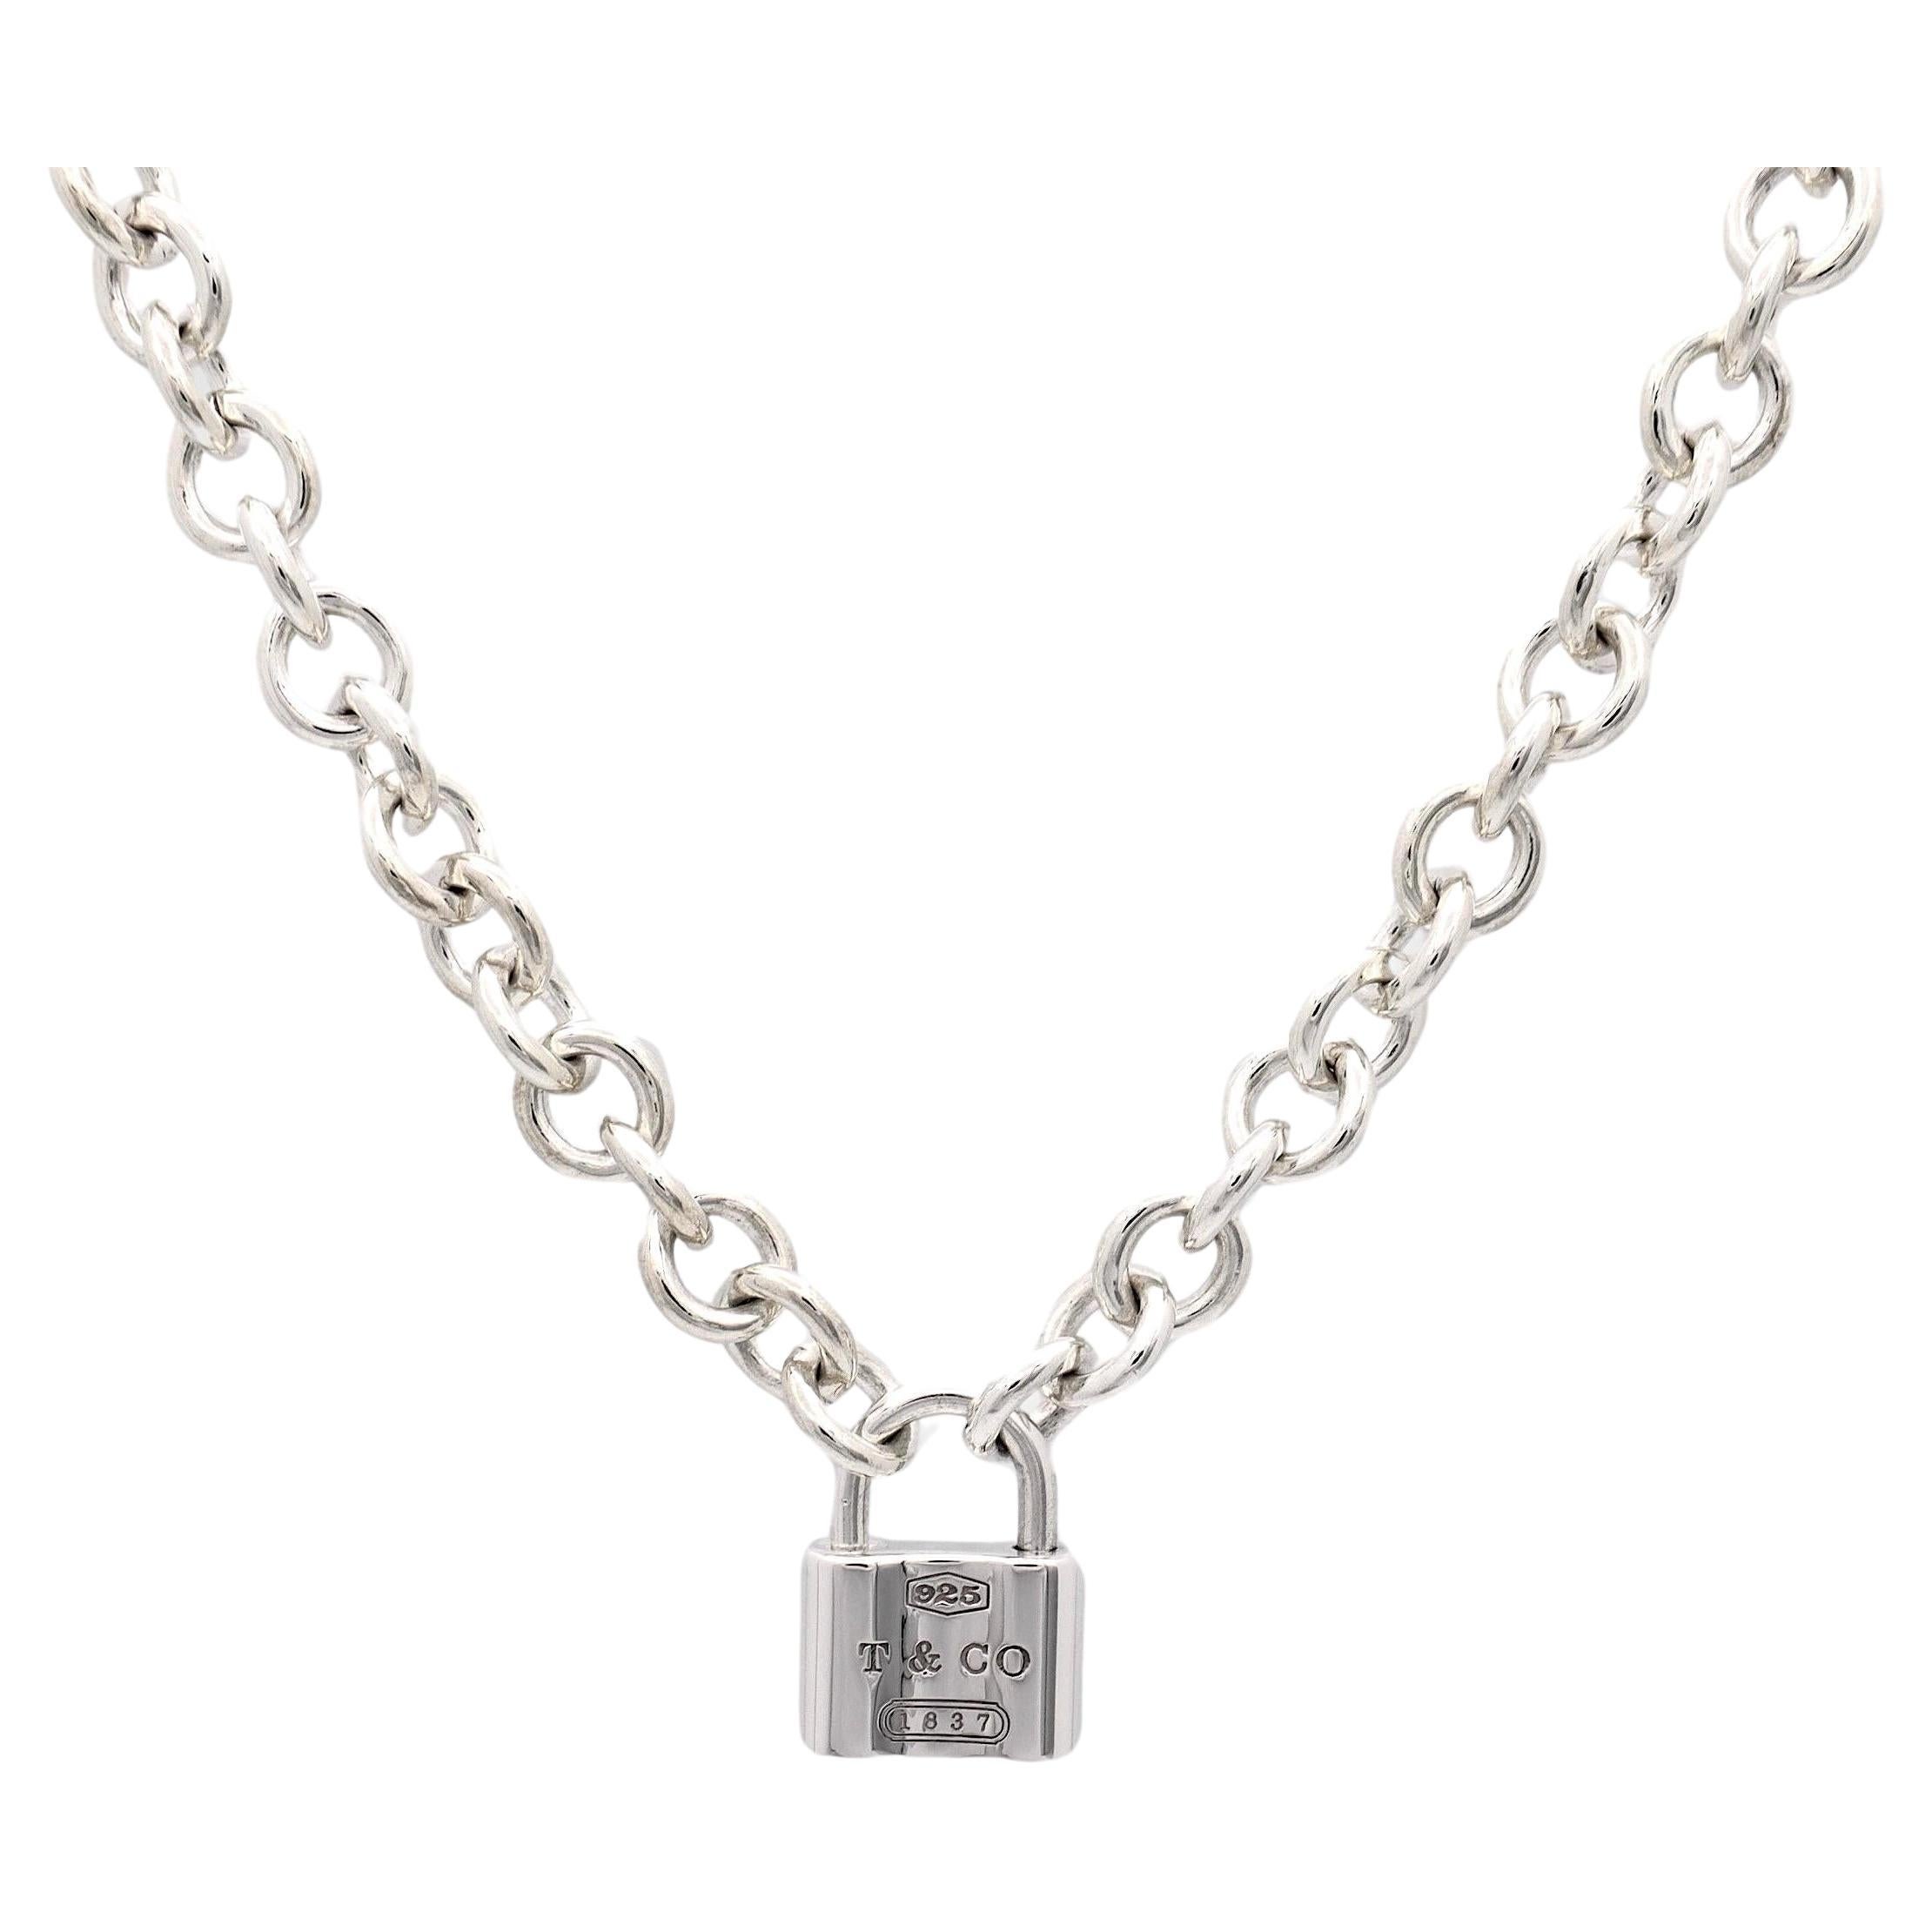 Tiffany & Co. Sterling Silver 1837 Padlock Link Necklace